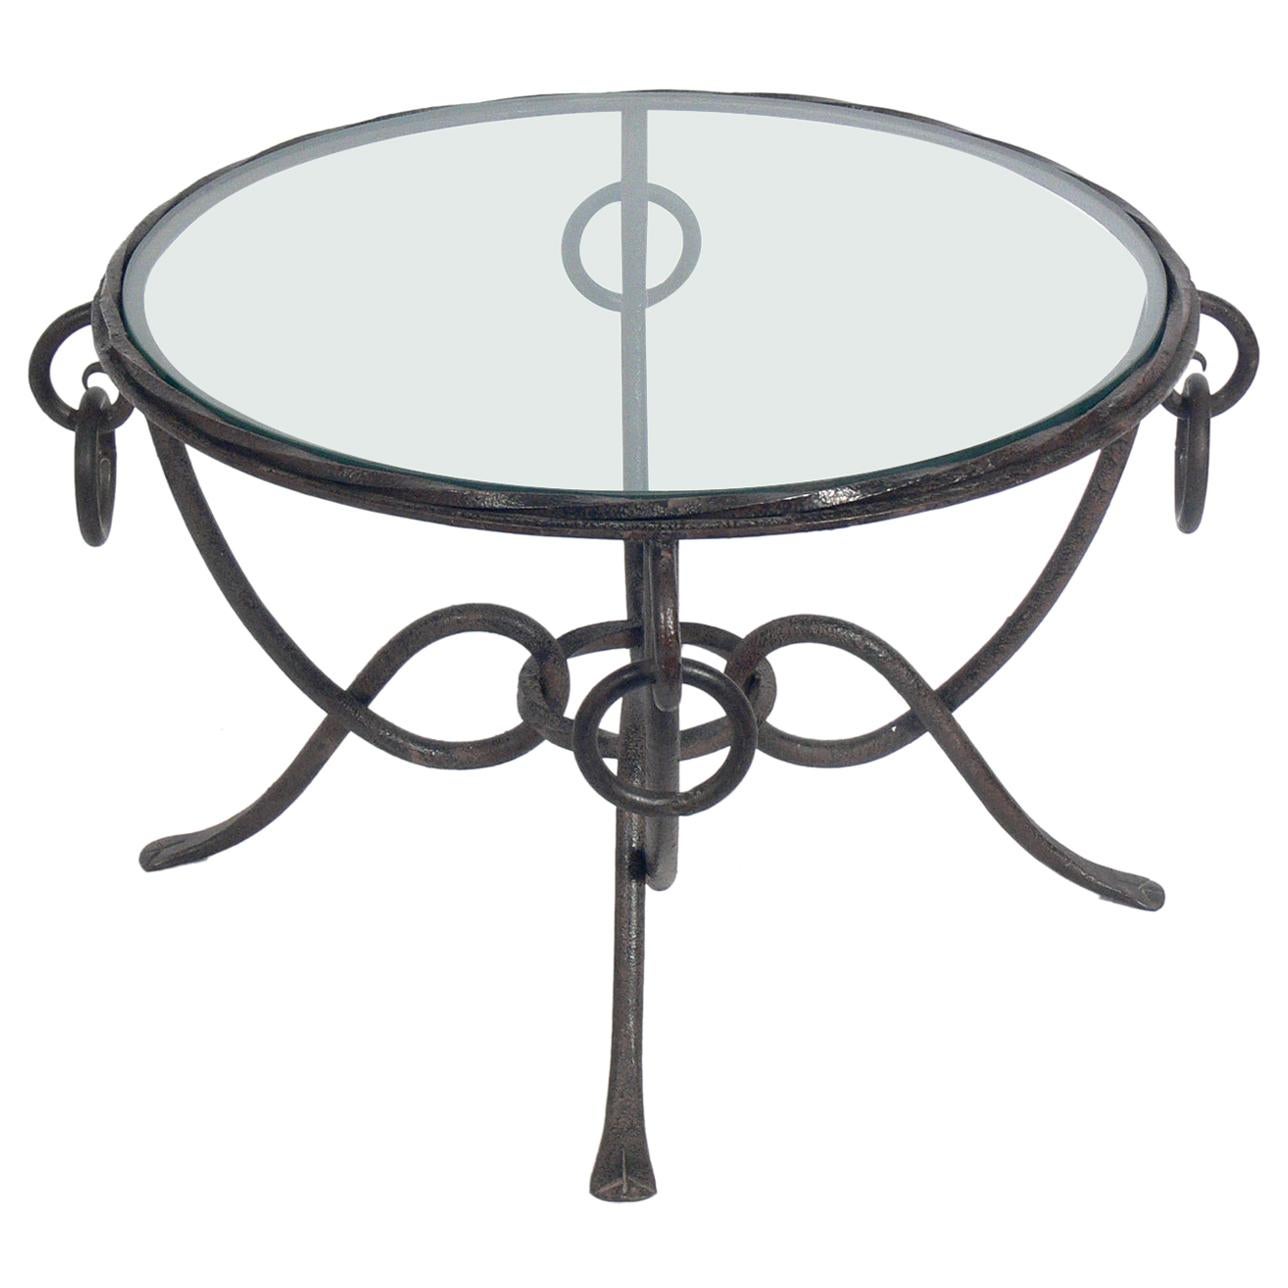 French Iron Coffee Table attributed to Rene Drouet